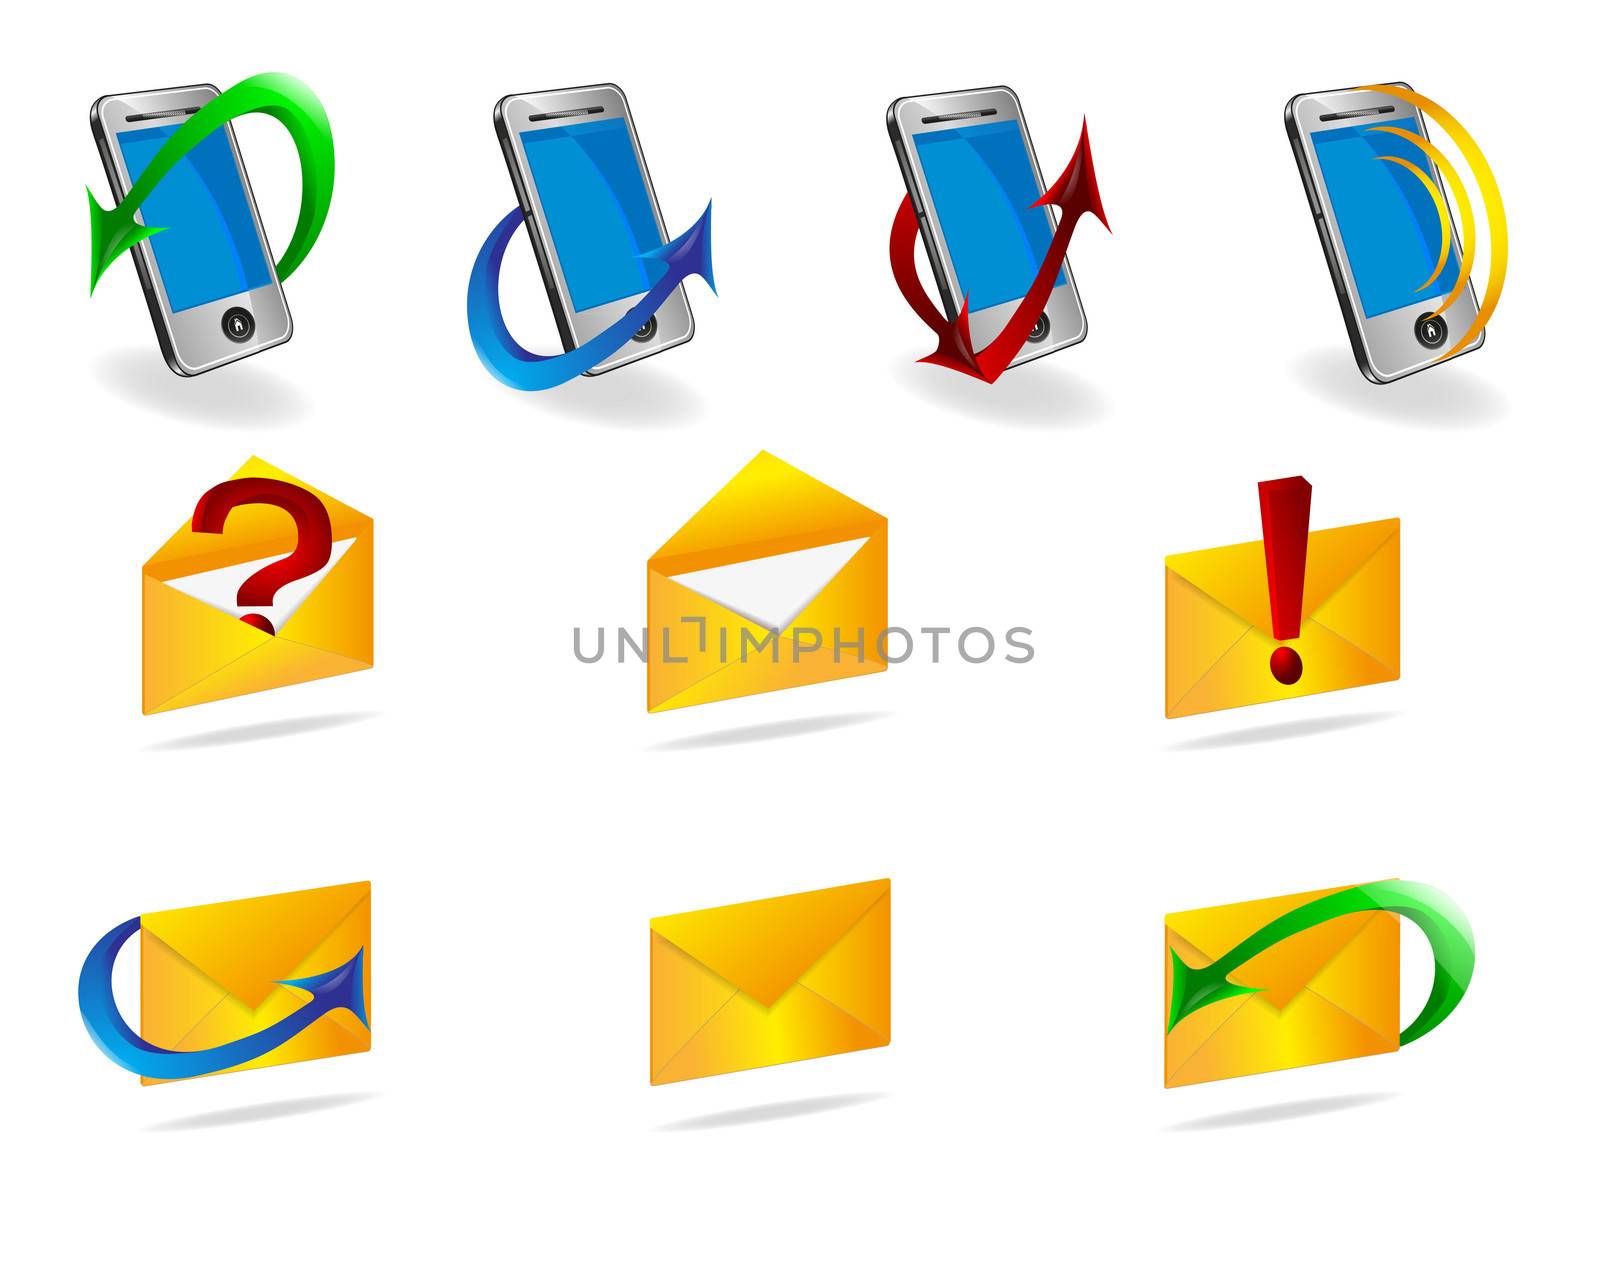 Icons for websites2 by natalinka7626